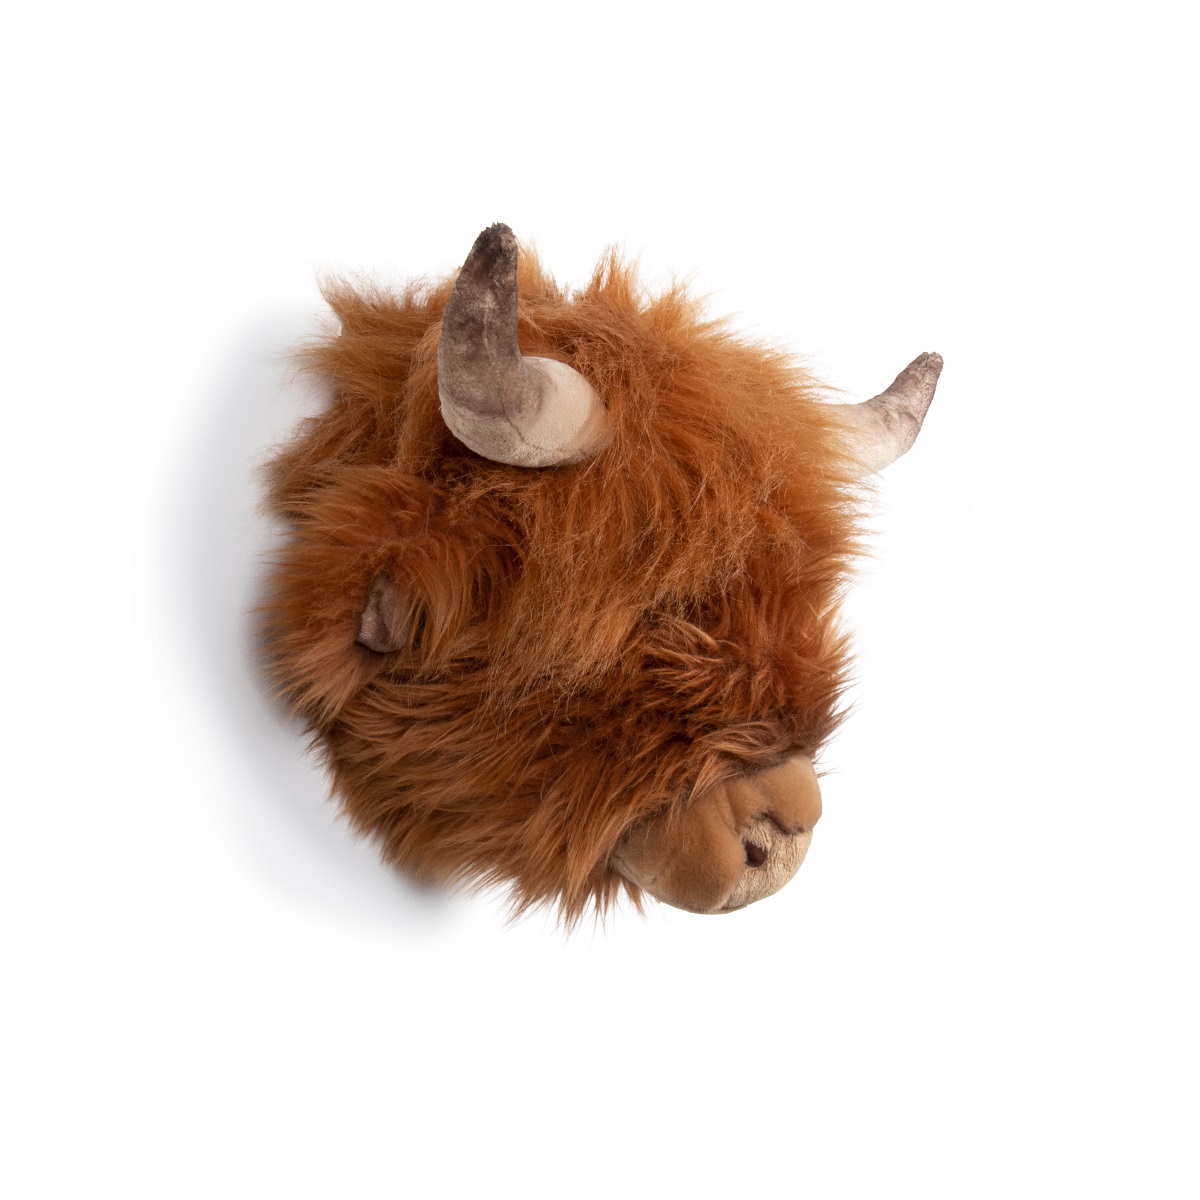 Head Large Highland Cow, Nicolas PRE-ORDER FOR LATE JUNE